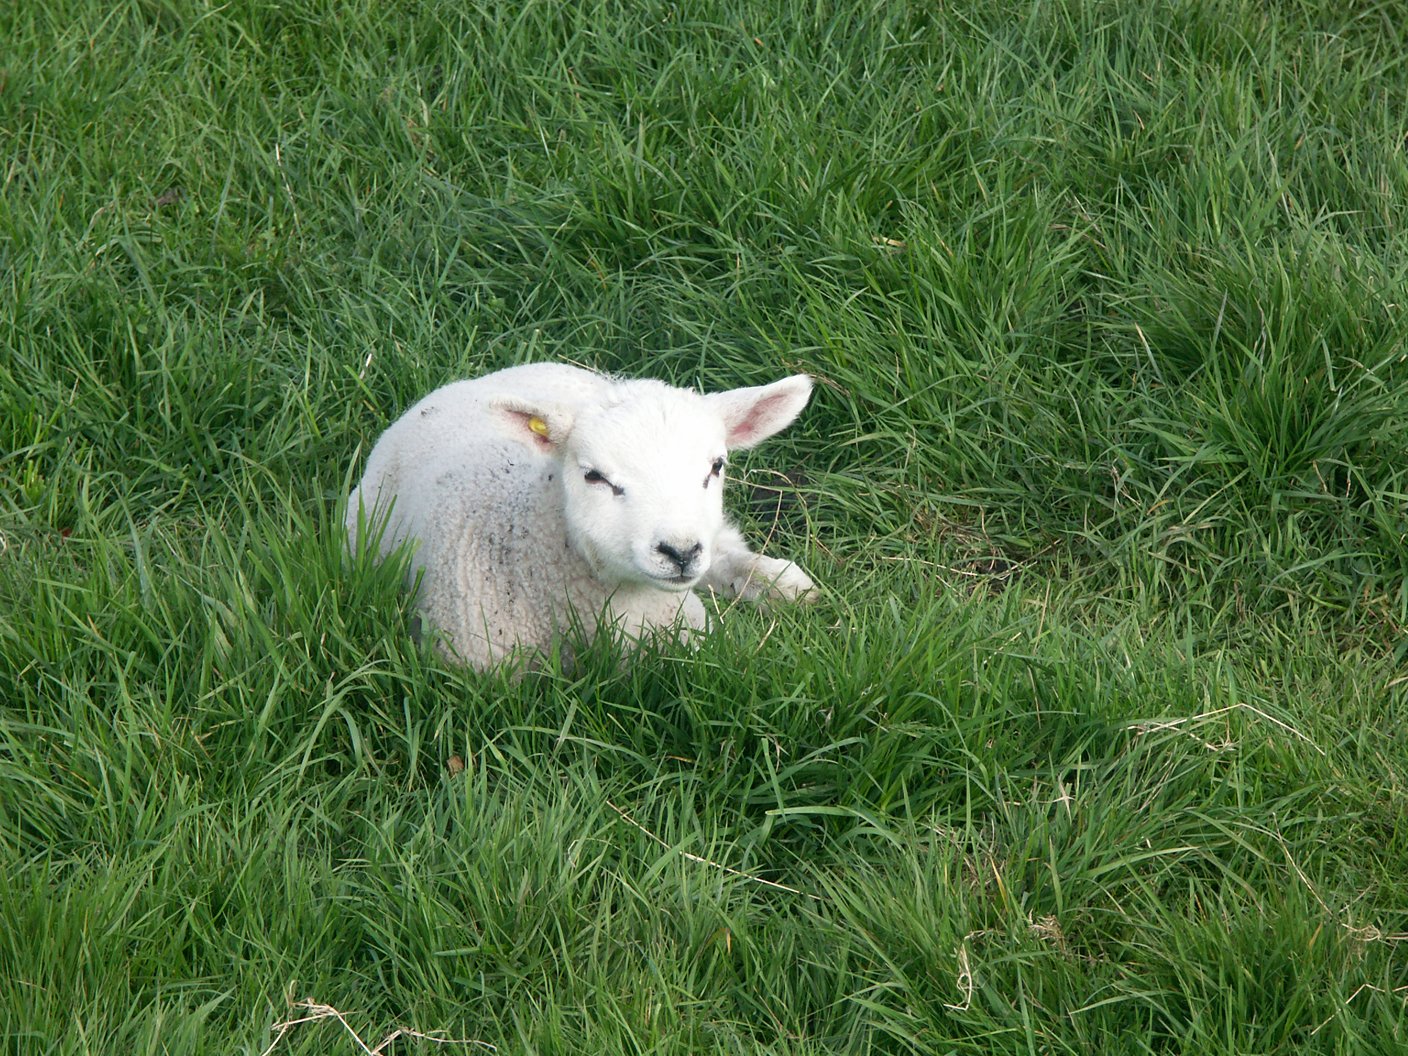 a lamb is sitting in some tall grass